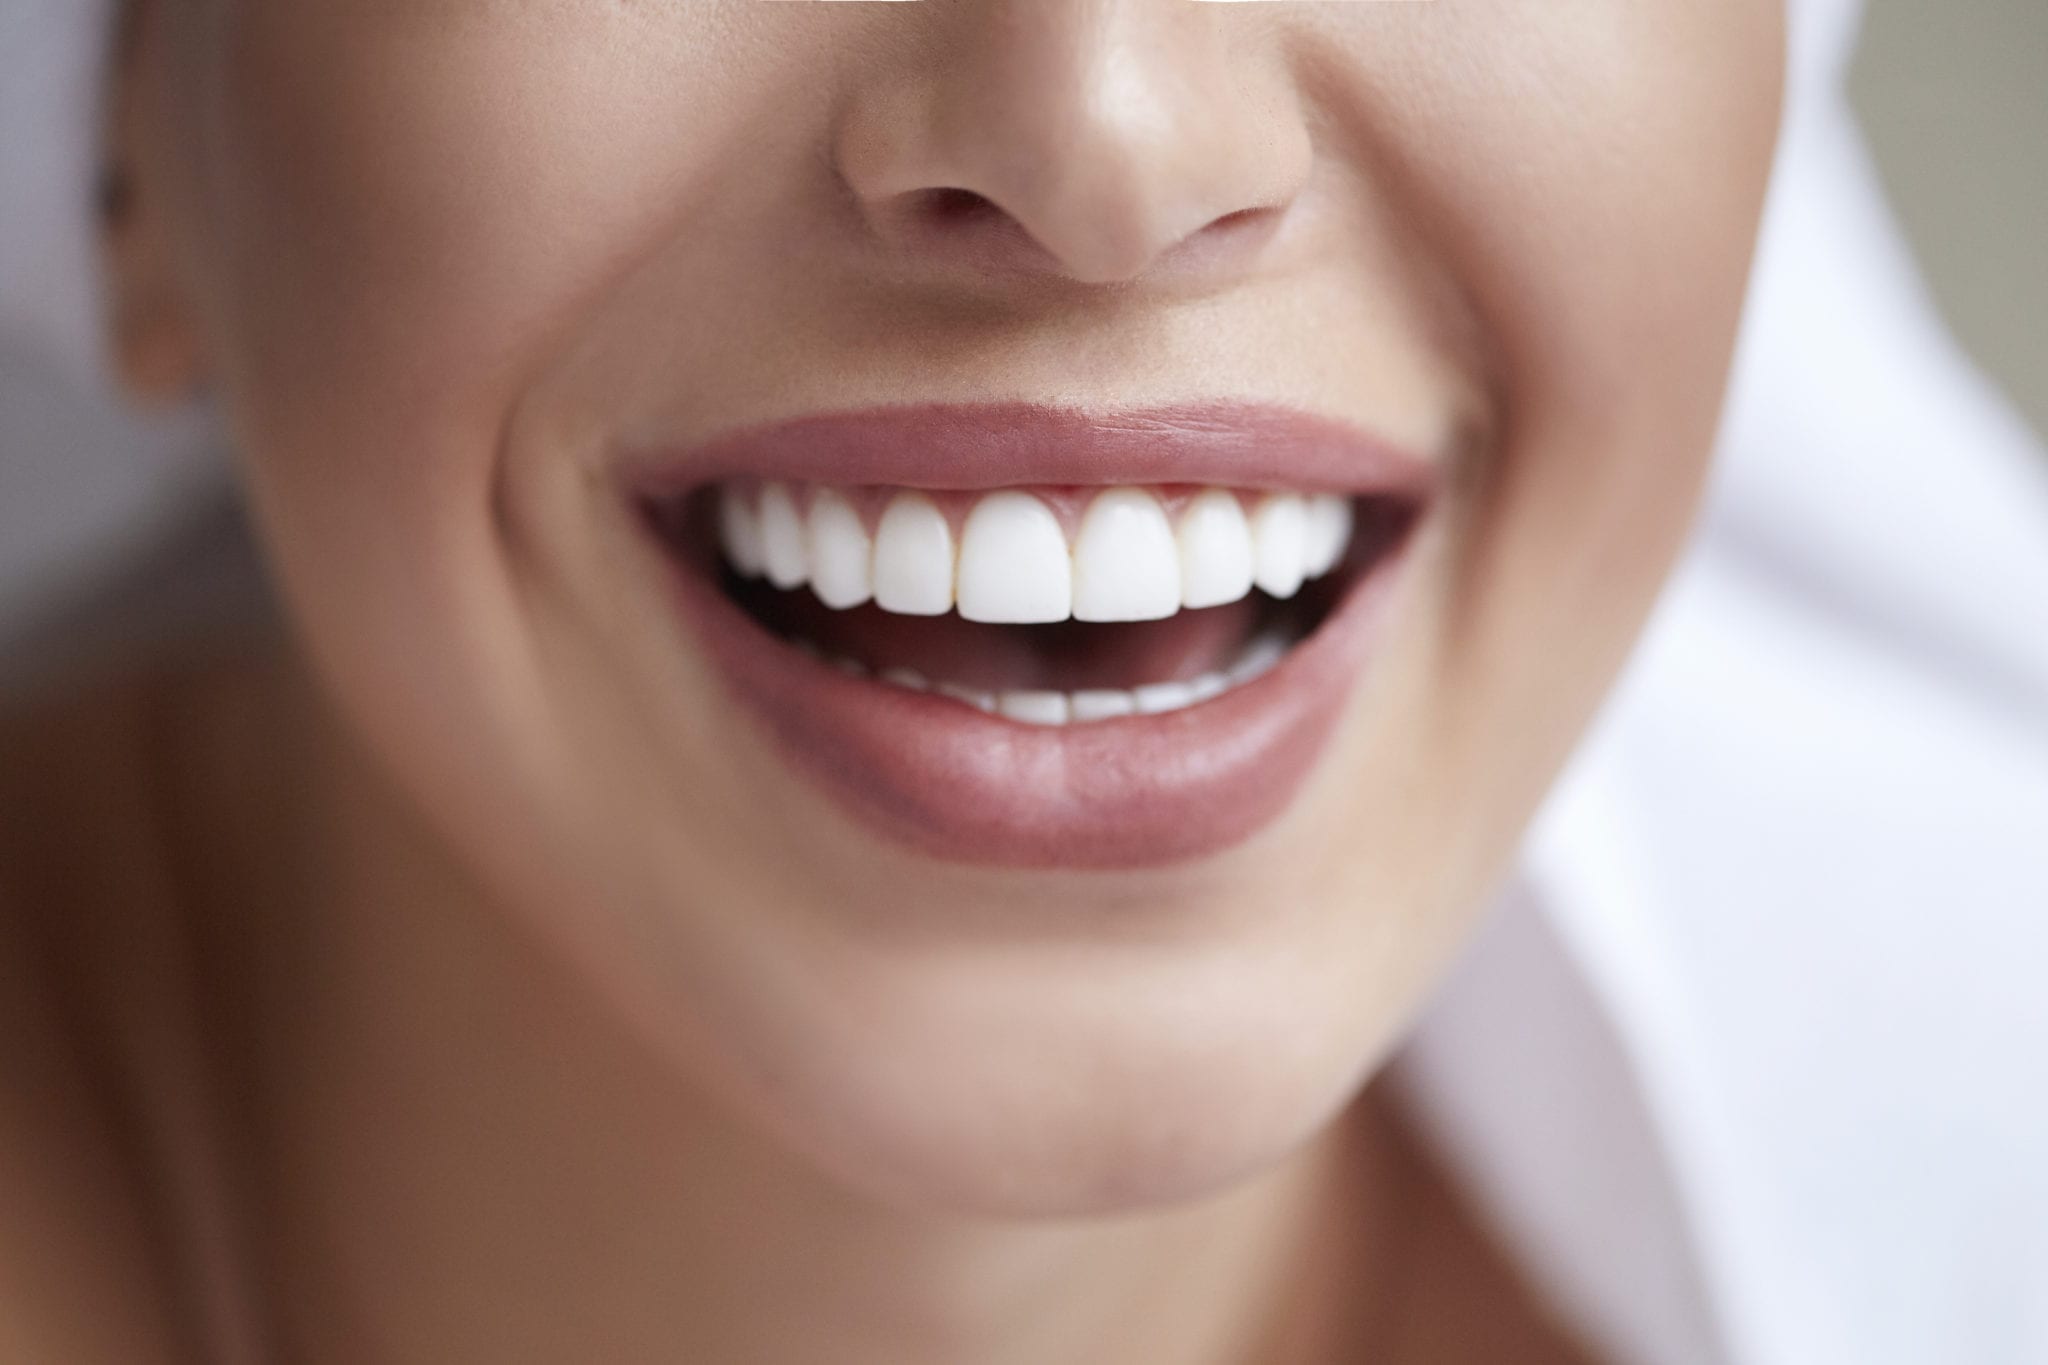 close up of bottom half of woman's face as she smiles widely